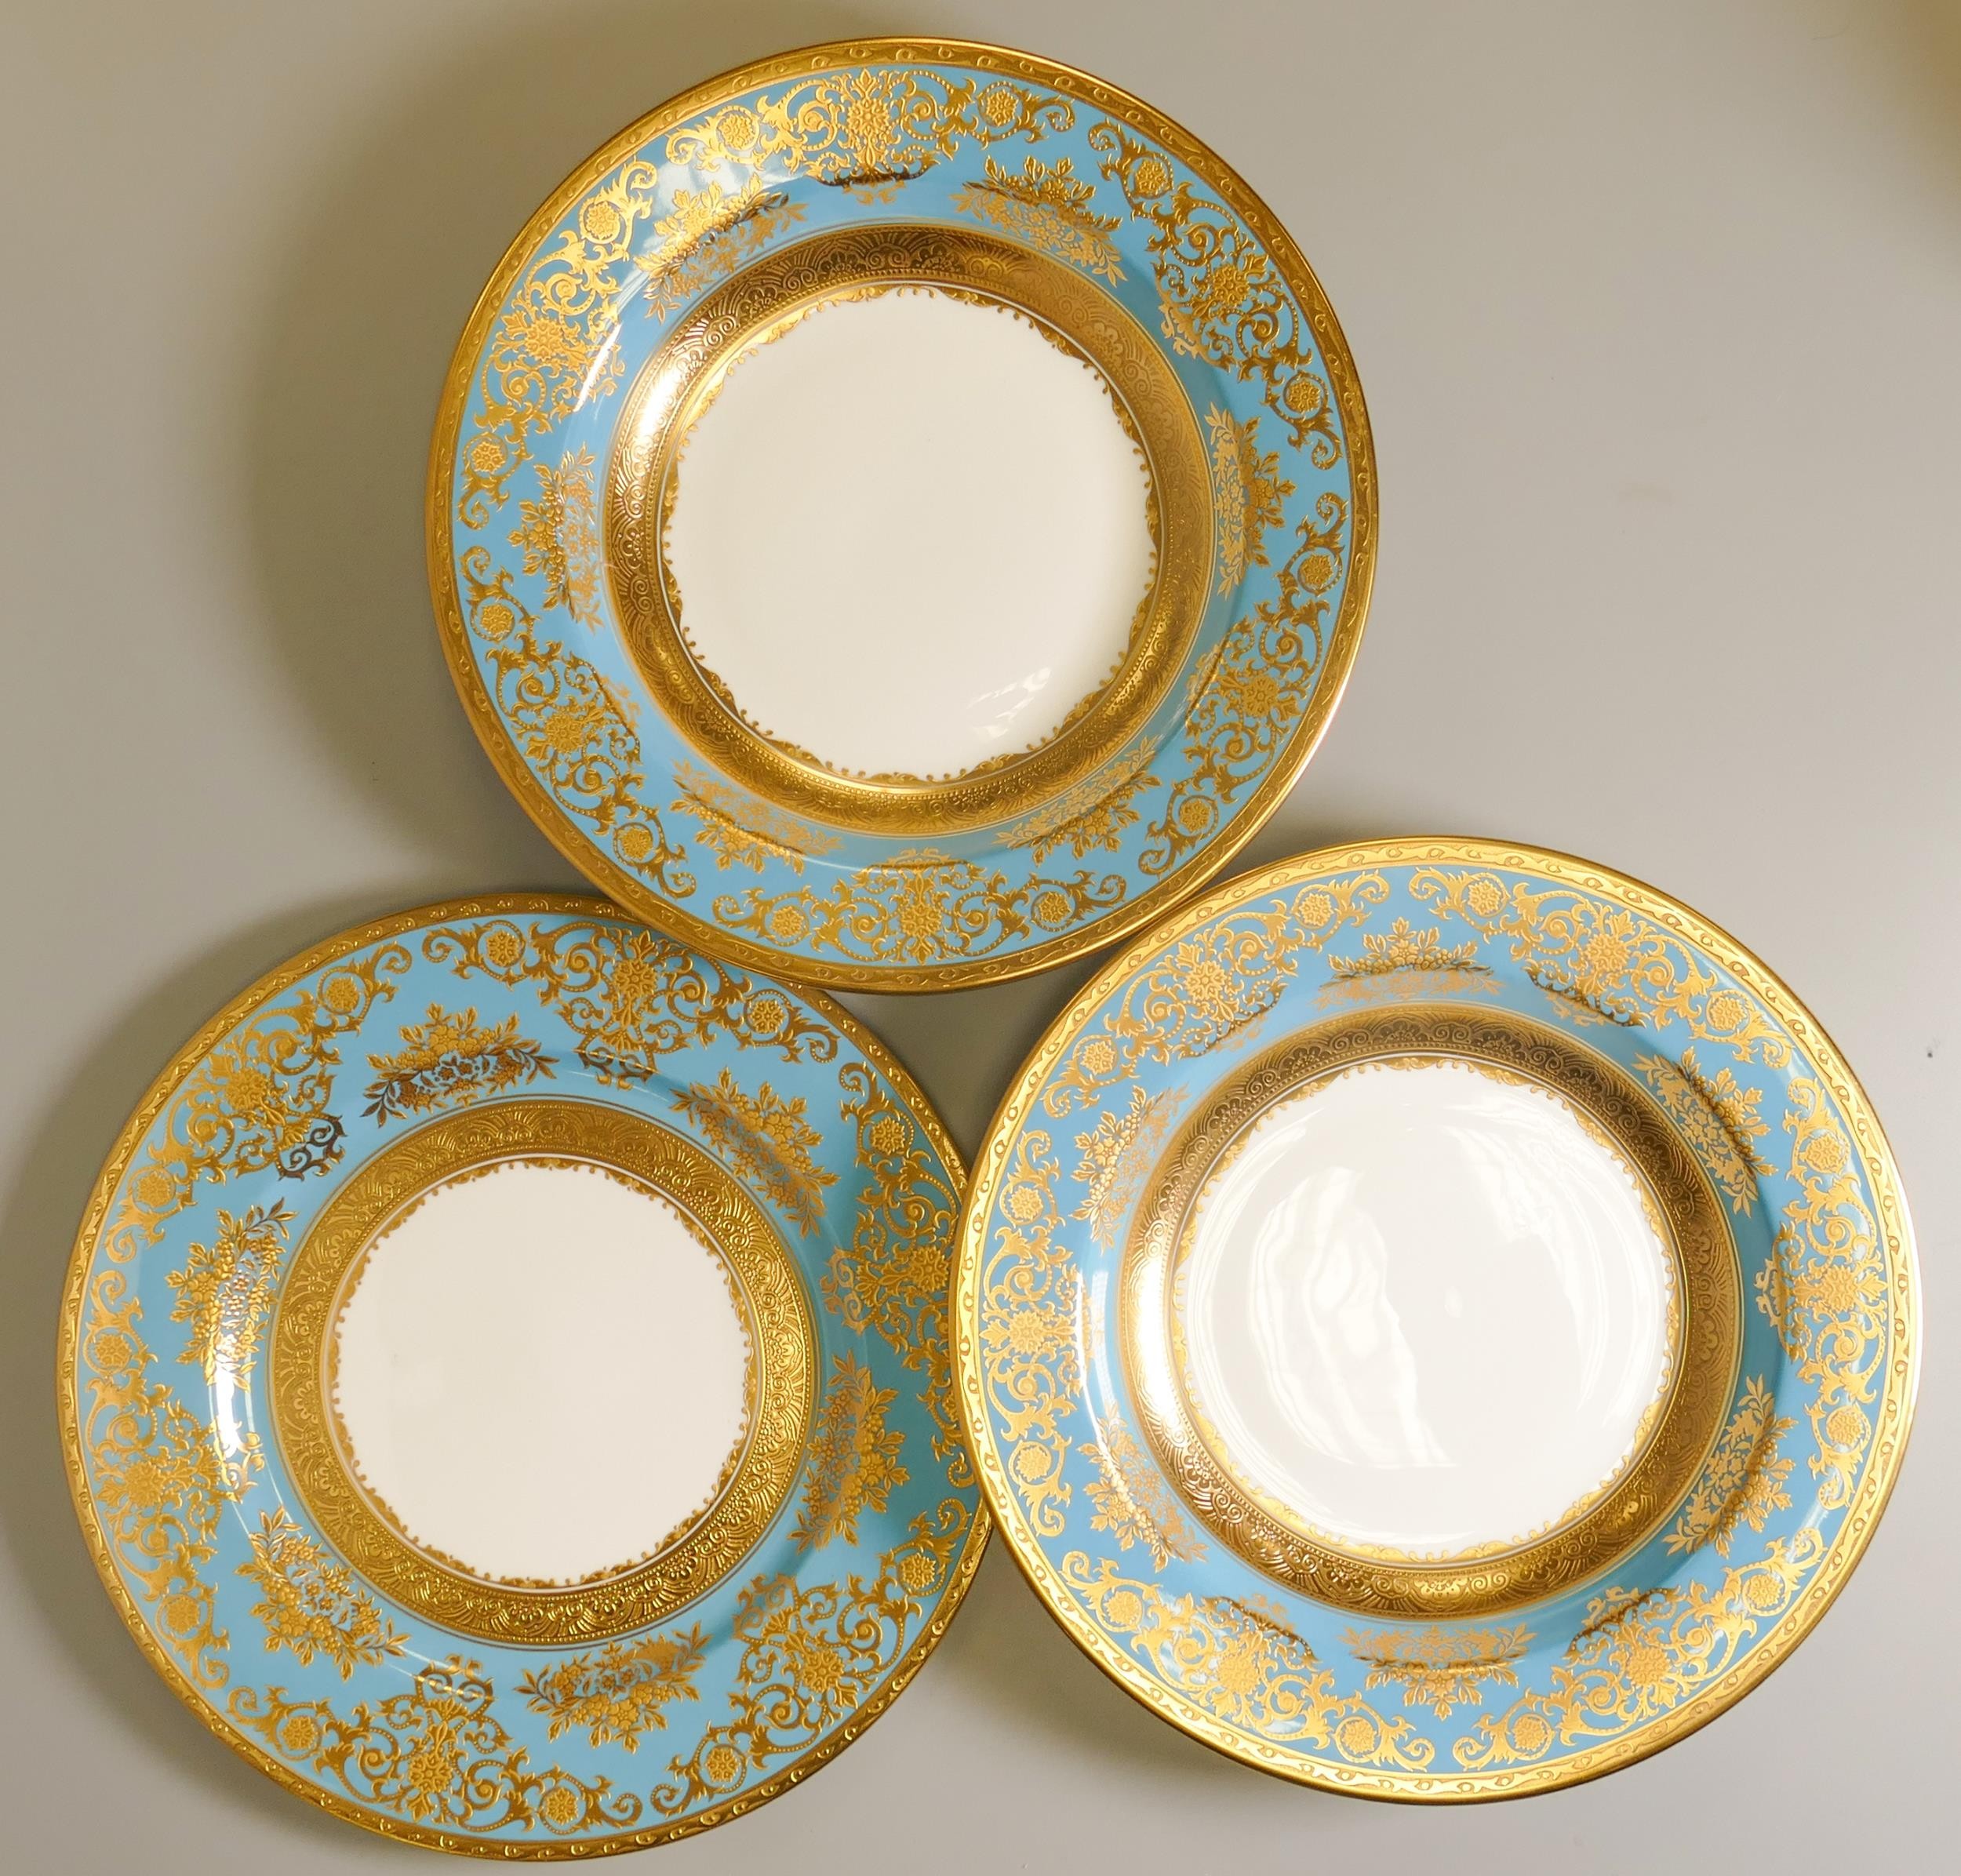 De Lamerie Fine Bone China heavily gilded Turquoise Exotic Garden patterned rimmed bowls & lunch